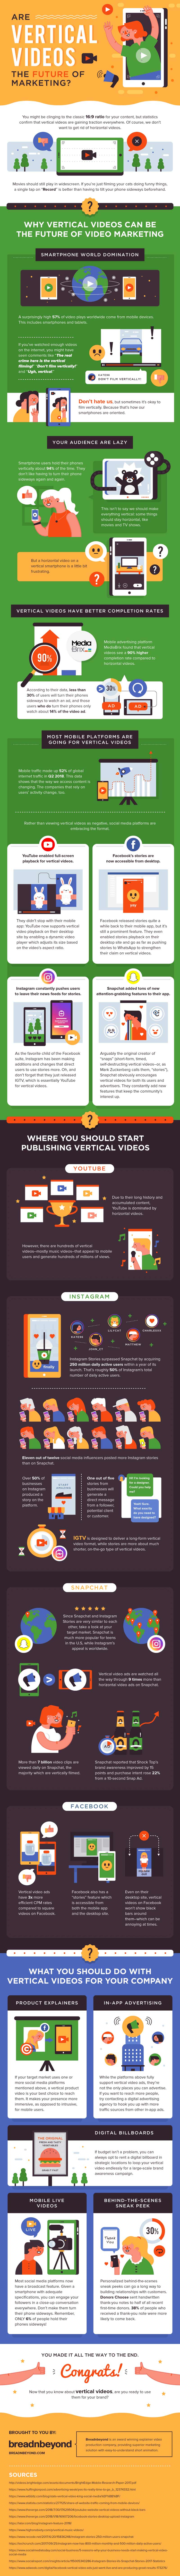 Vertical Videos Infographic